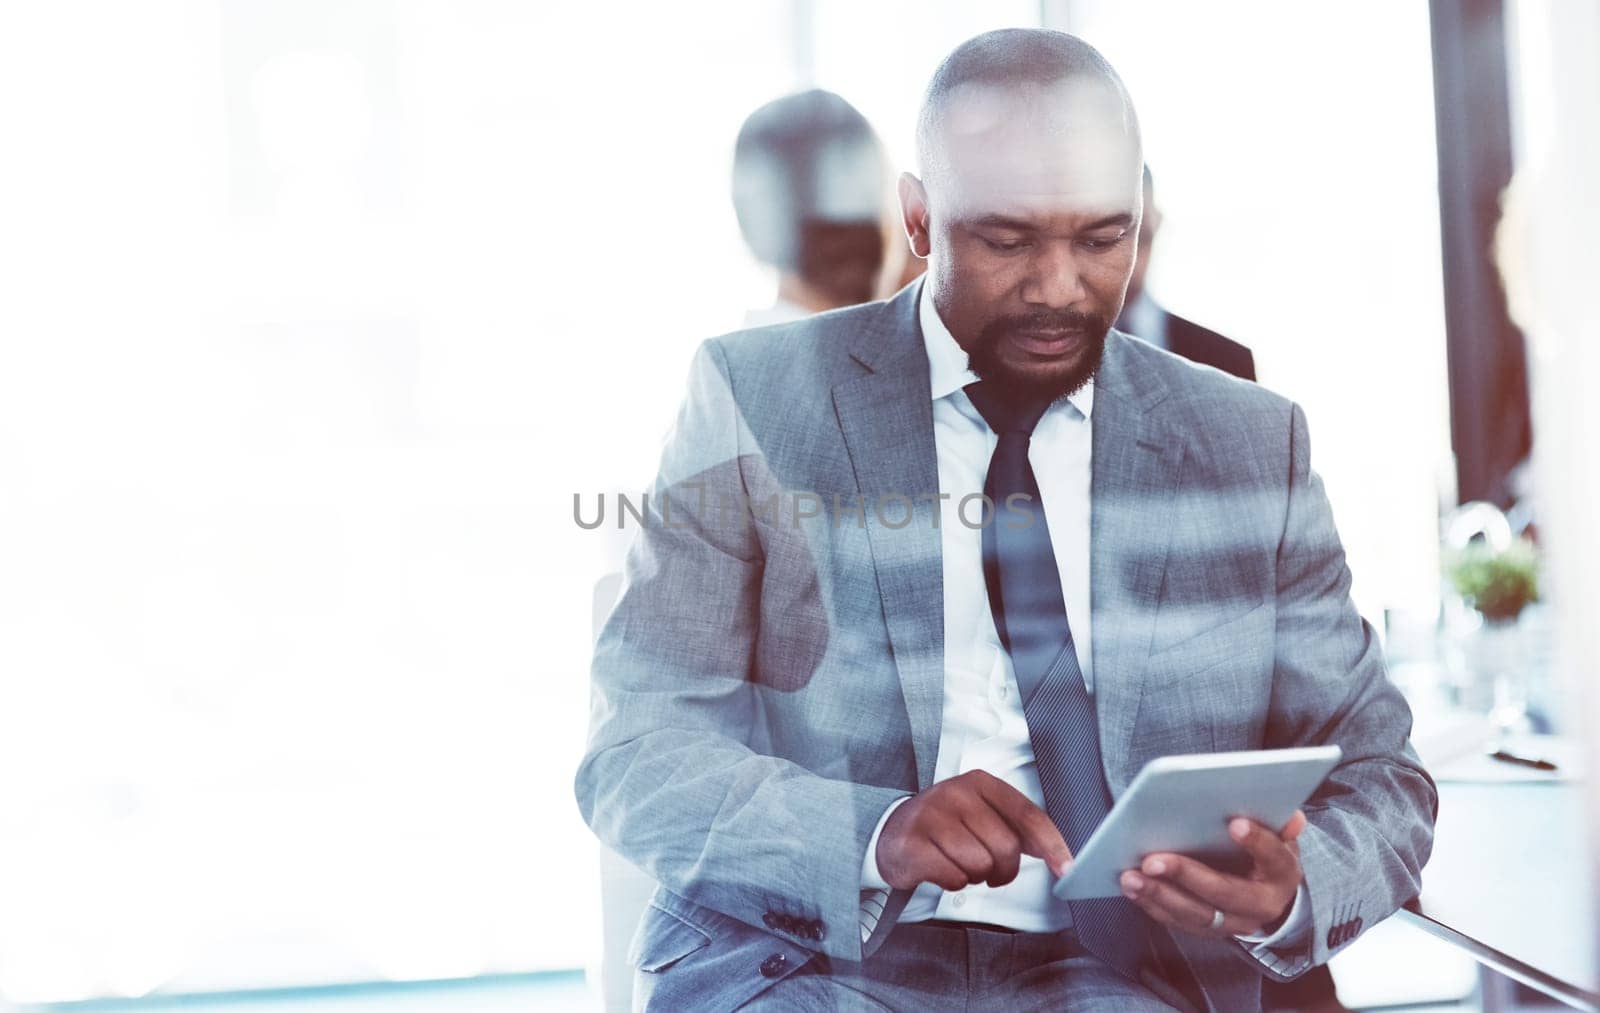 The ideal device to compliment his professional needs. a businessman using a digital tablet during a meeting at work